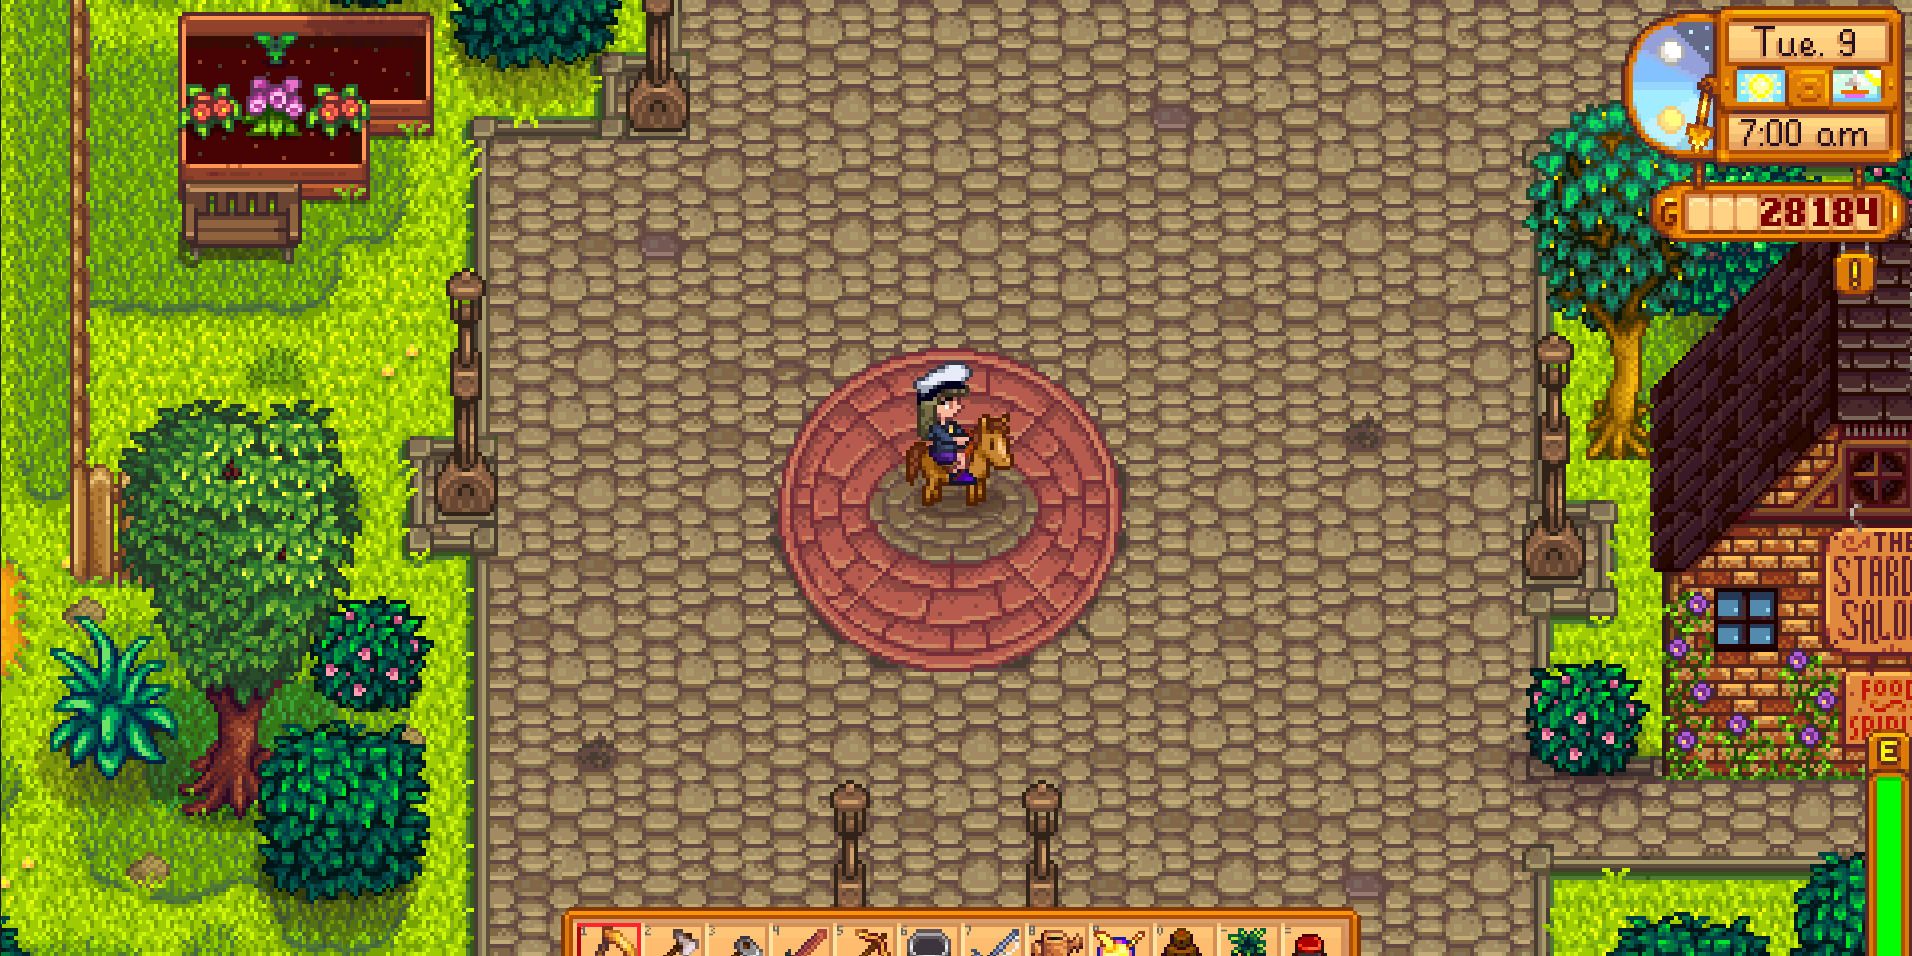 Image of the red circle in the middle of Pelican Town in Stardew Valley